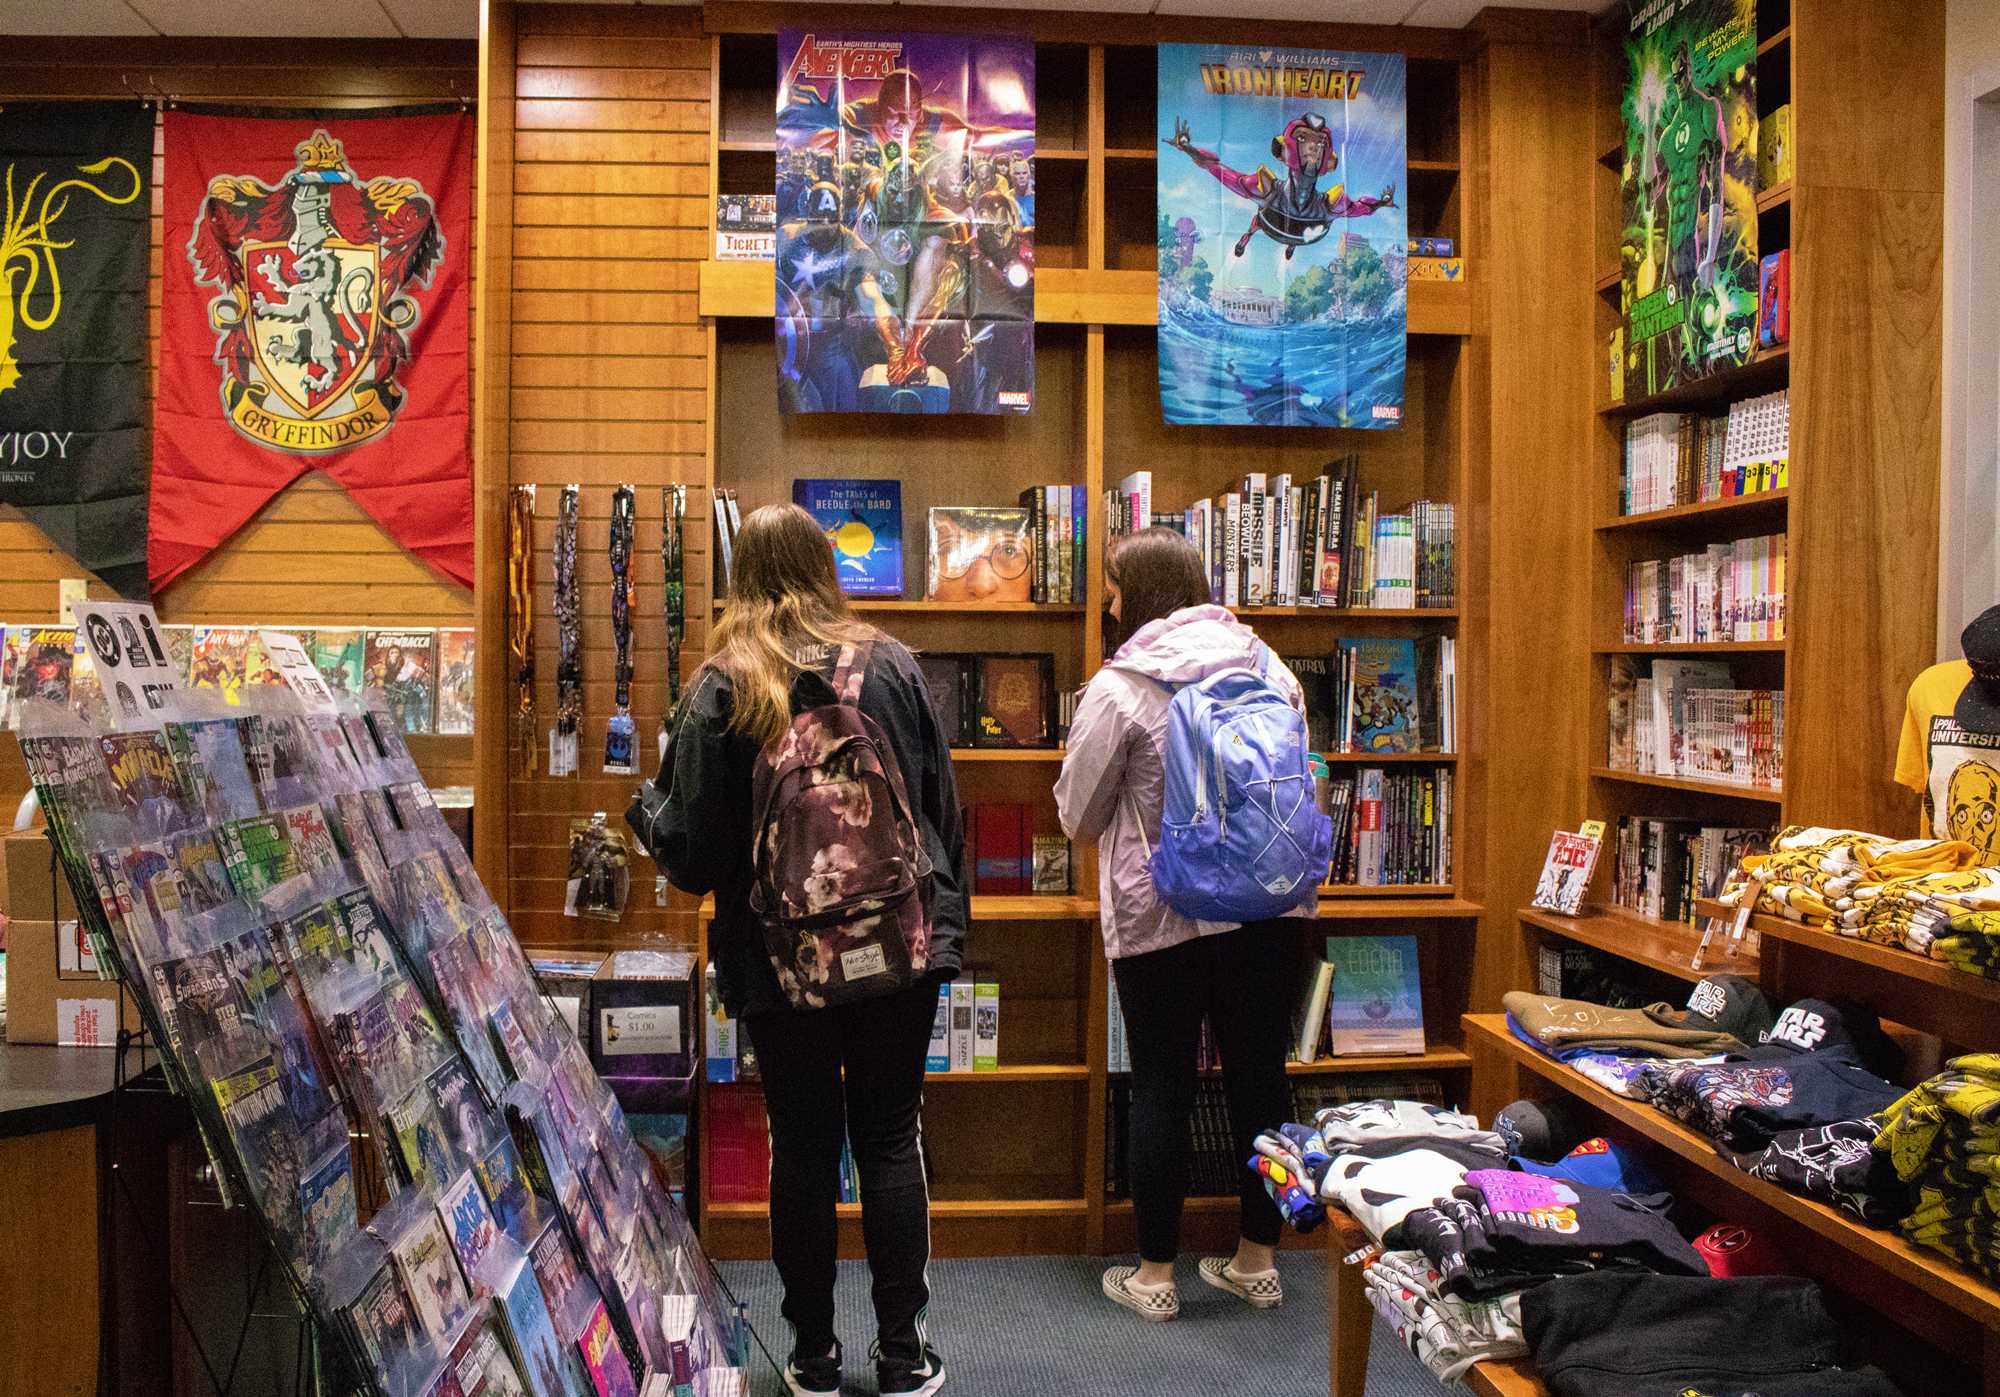 Students+browse+the+comic+book+section+of+the+university+book+store.+The+bookstore%E2%80%99s+new+selection+of+comic+books+range+from+super+hero+stories+like+Black+Panther+to+TV+show+favorites+like+Stranger+things